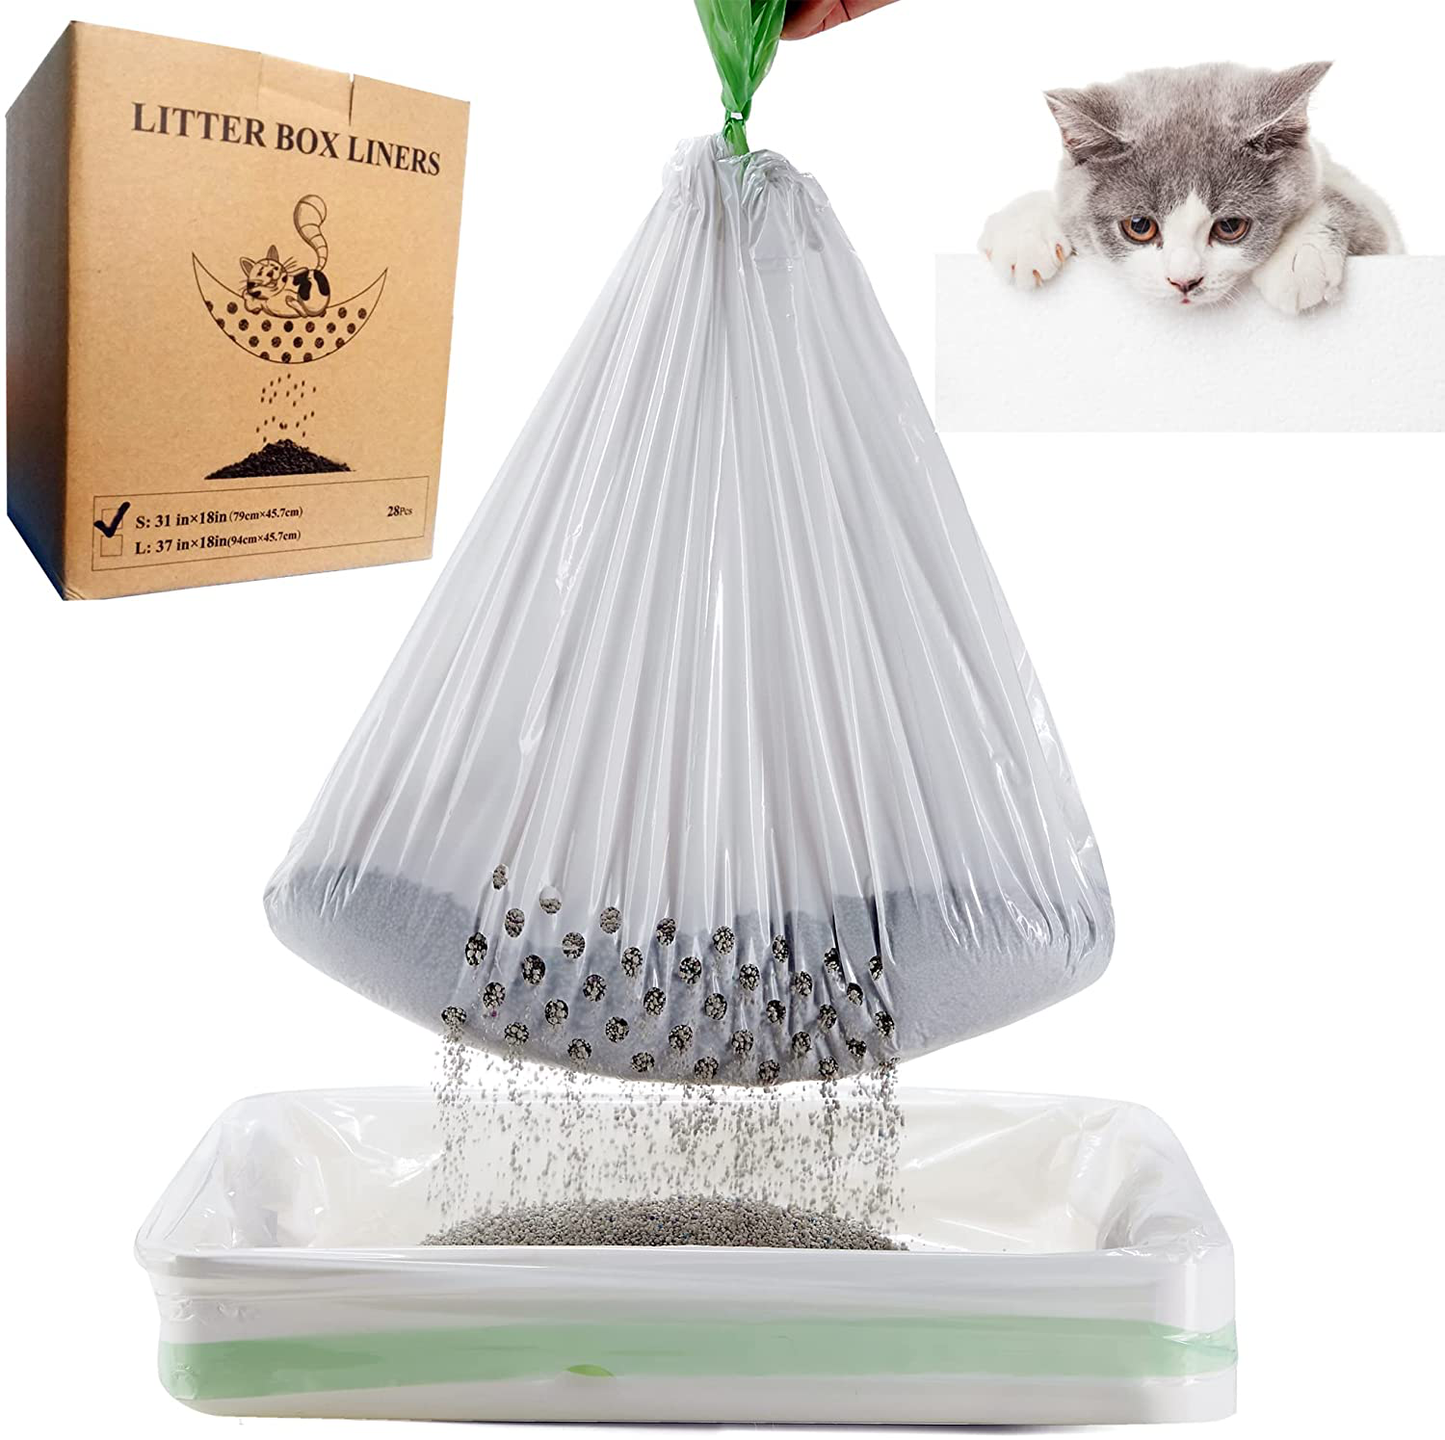 Gefryco Sifting Cat Litter Box Liners Waste Litter Bags for Pet Cats Pan Liners Extra Thick 2 Mil (28 Count - 37" X 18") Animals & Pet Supplies > Pet Supplies > Cat Supplies > Cat Litter Box Liners Gefryco 28 Count - 31" x 18"  